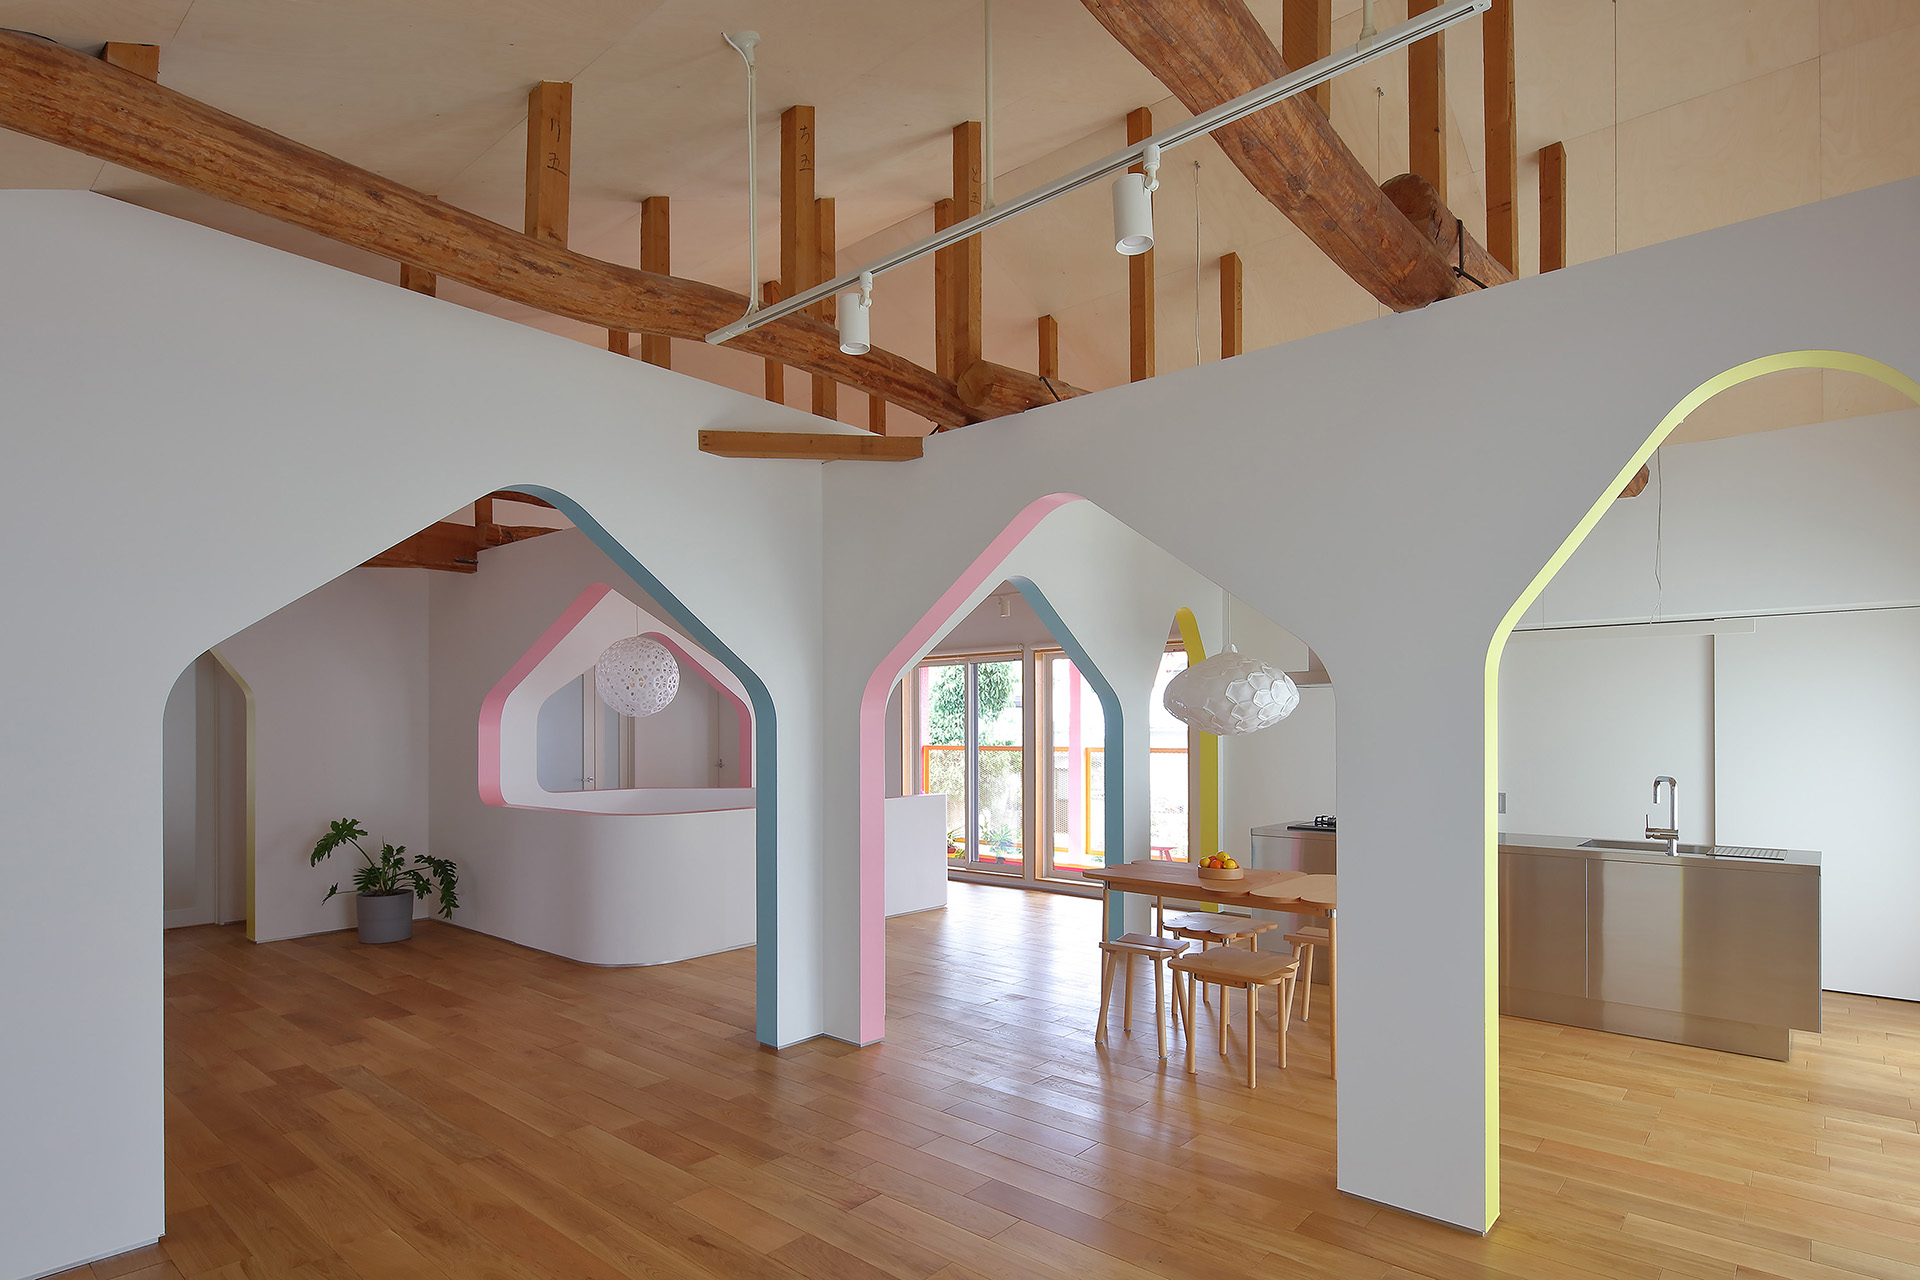 House of Many Arches by 24d-studio, Kobe, Japan arch